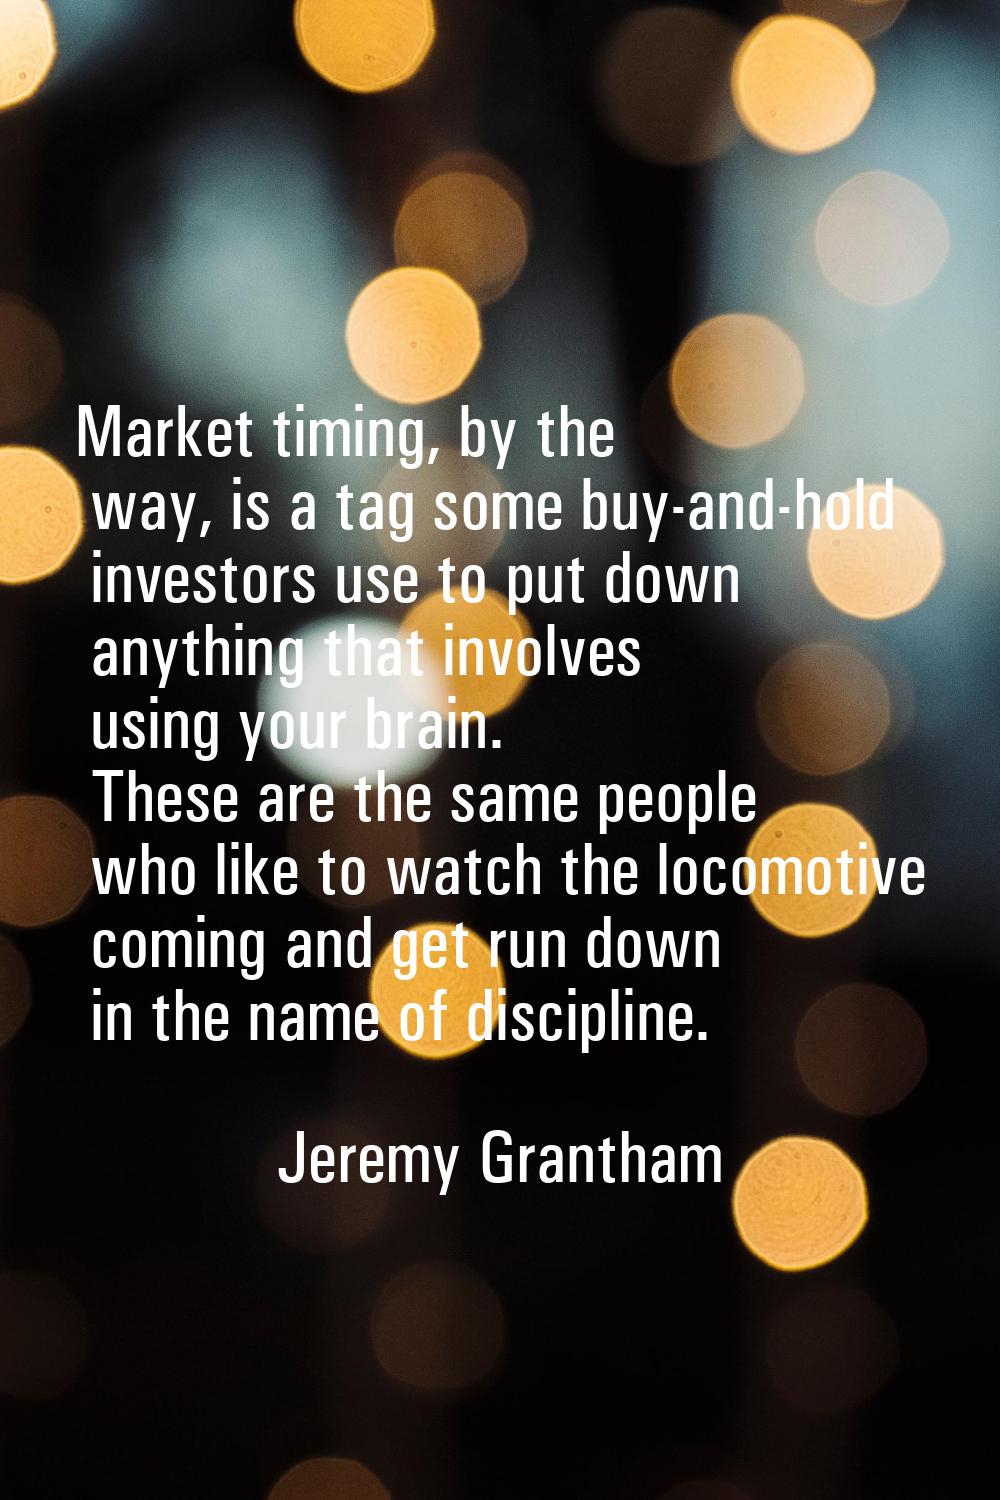 Market timing, by the way, is a tag some buy-and-hold investors use to put down anything that invol